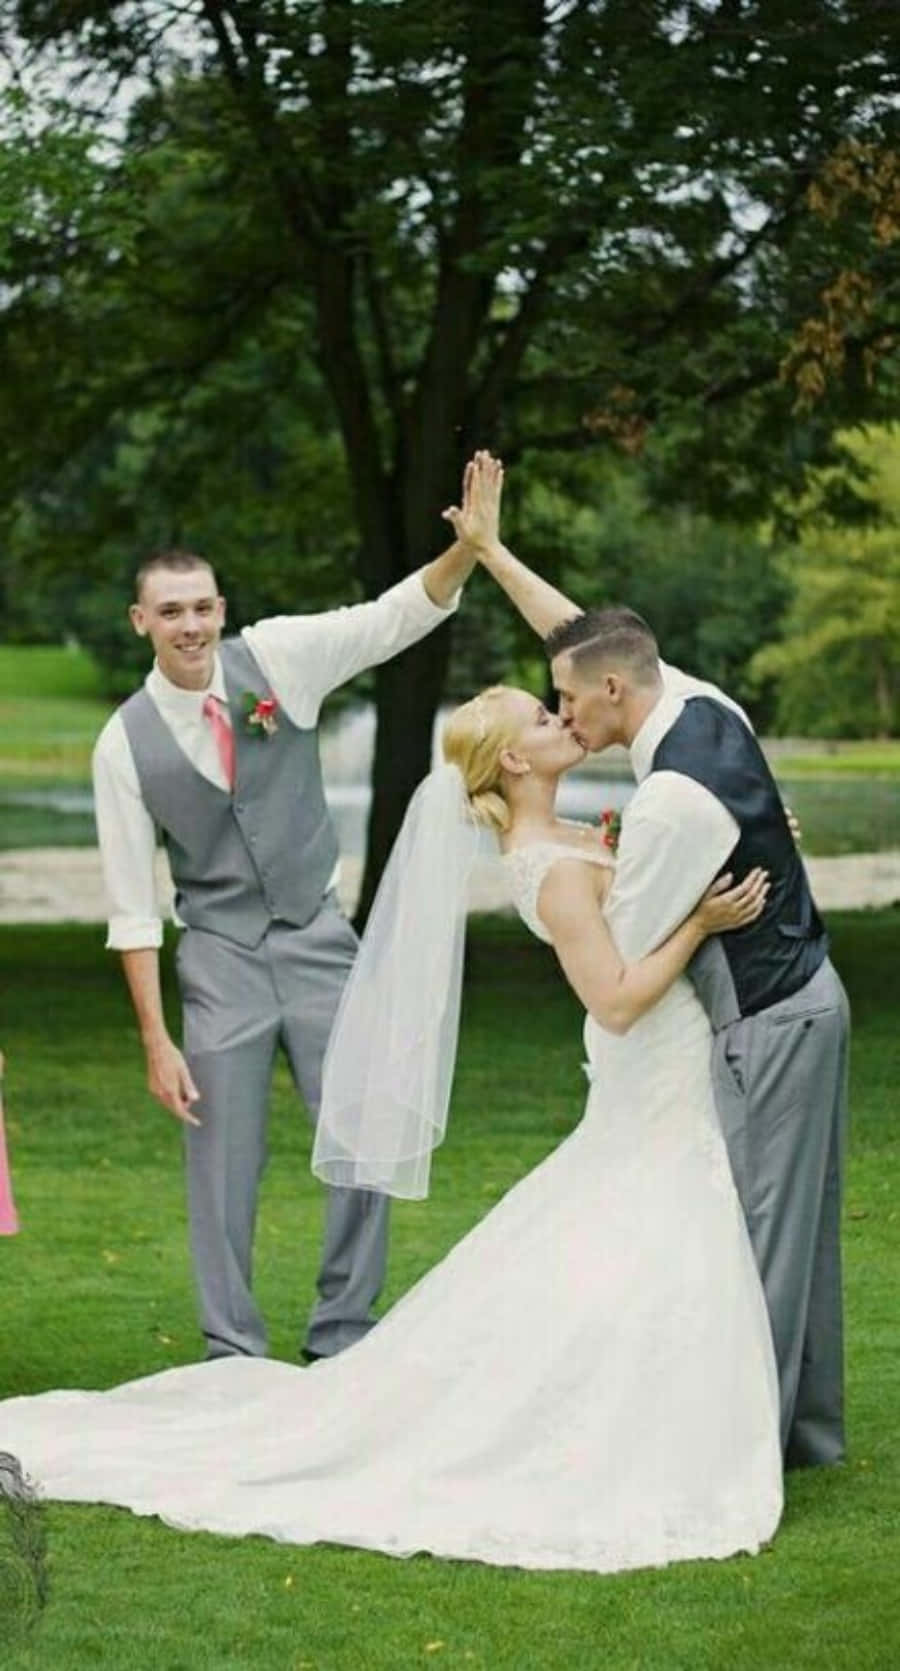 A Bride And Groom Are Holding Hands In The Grass